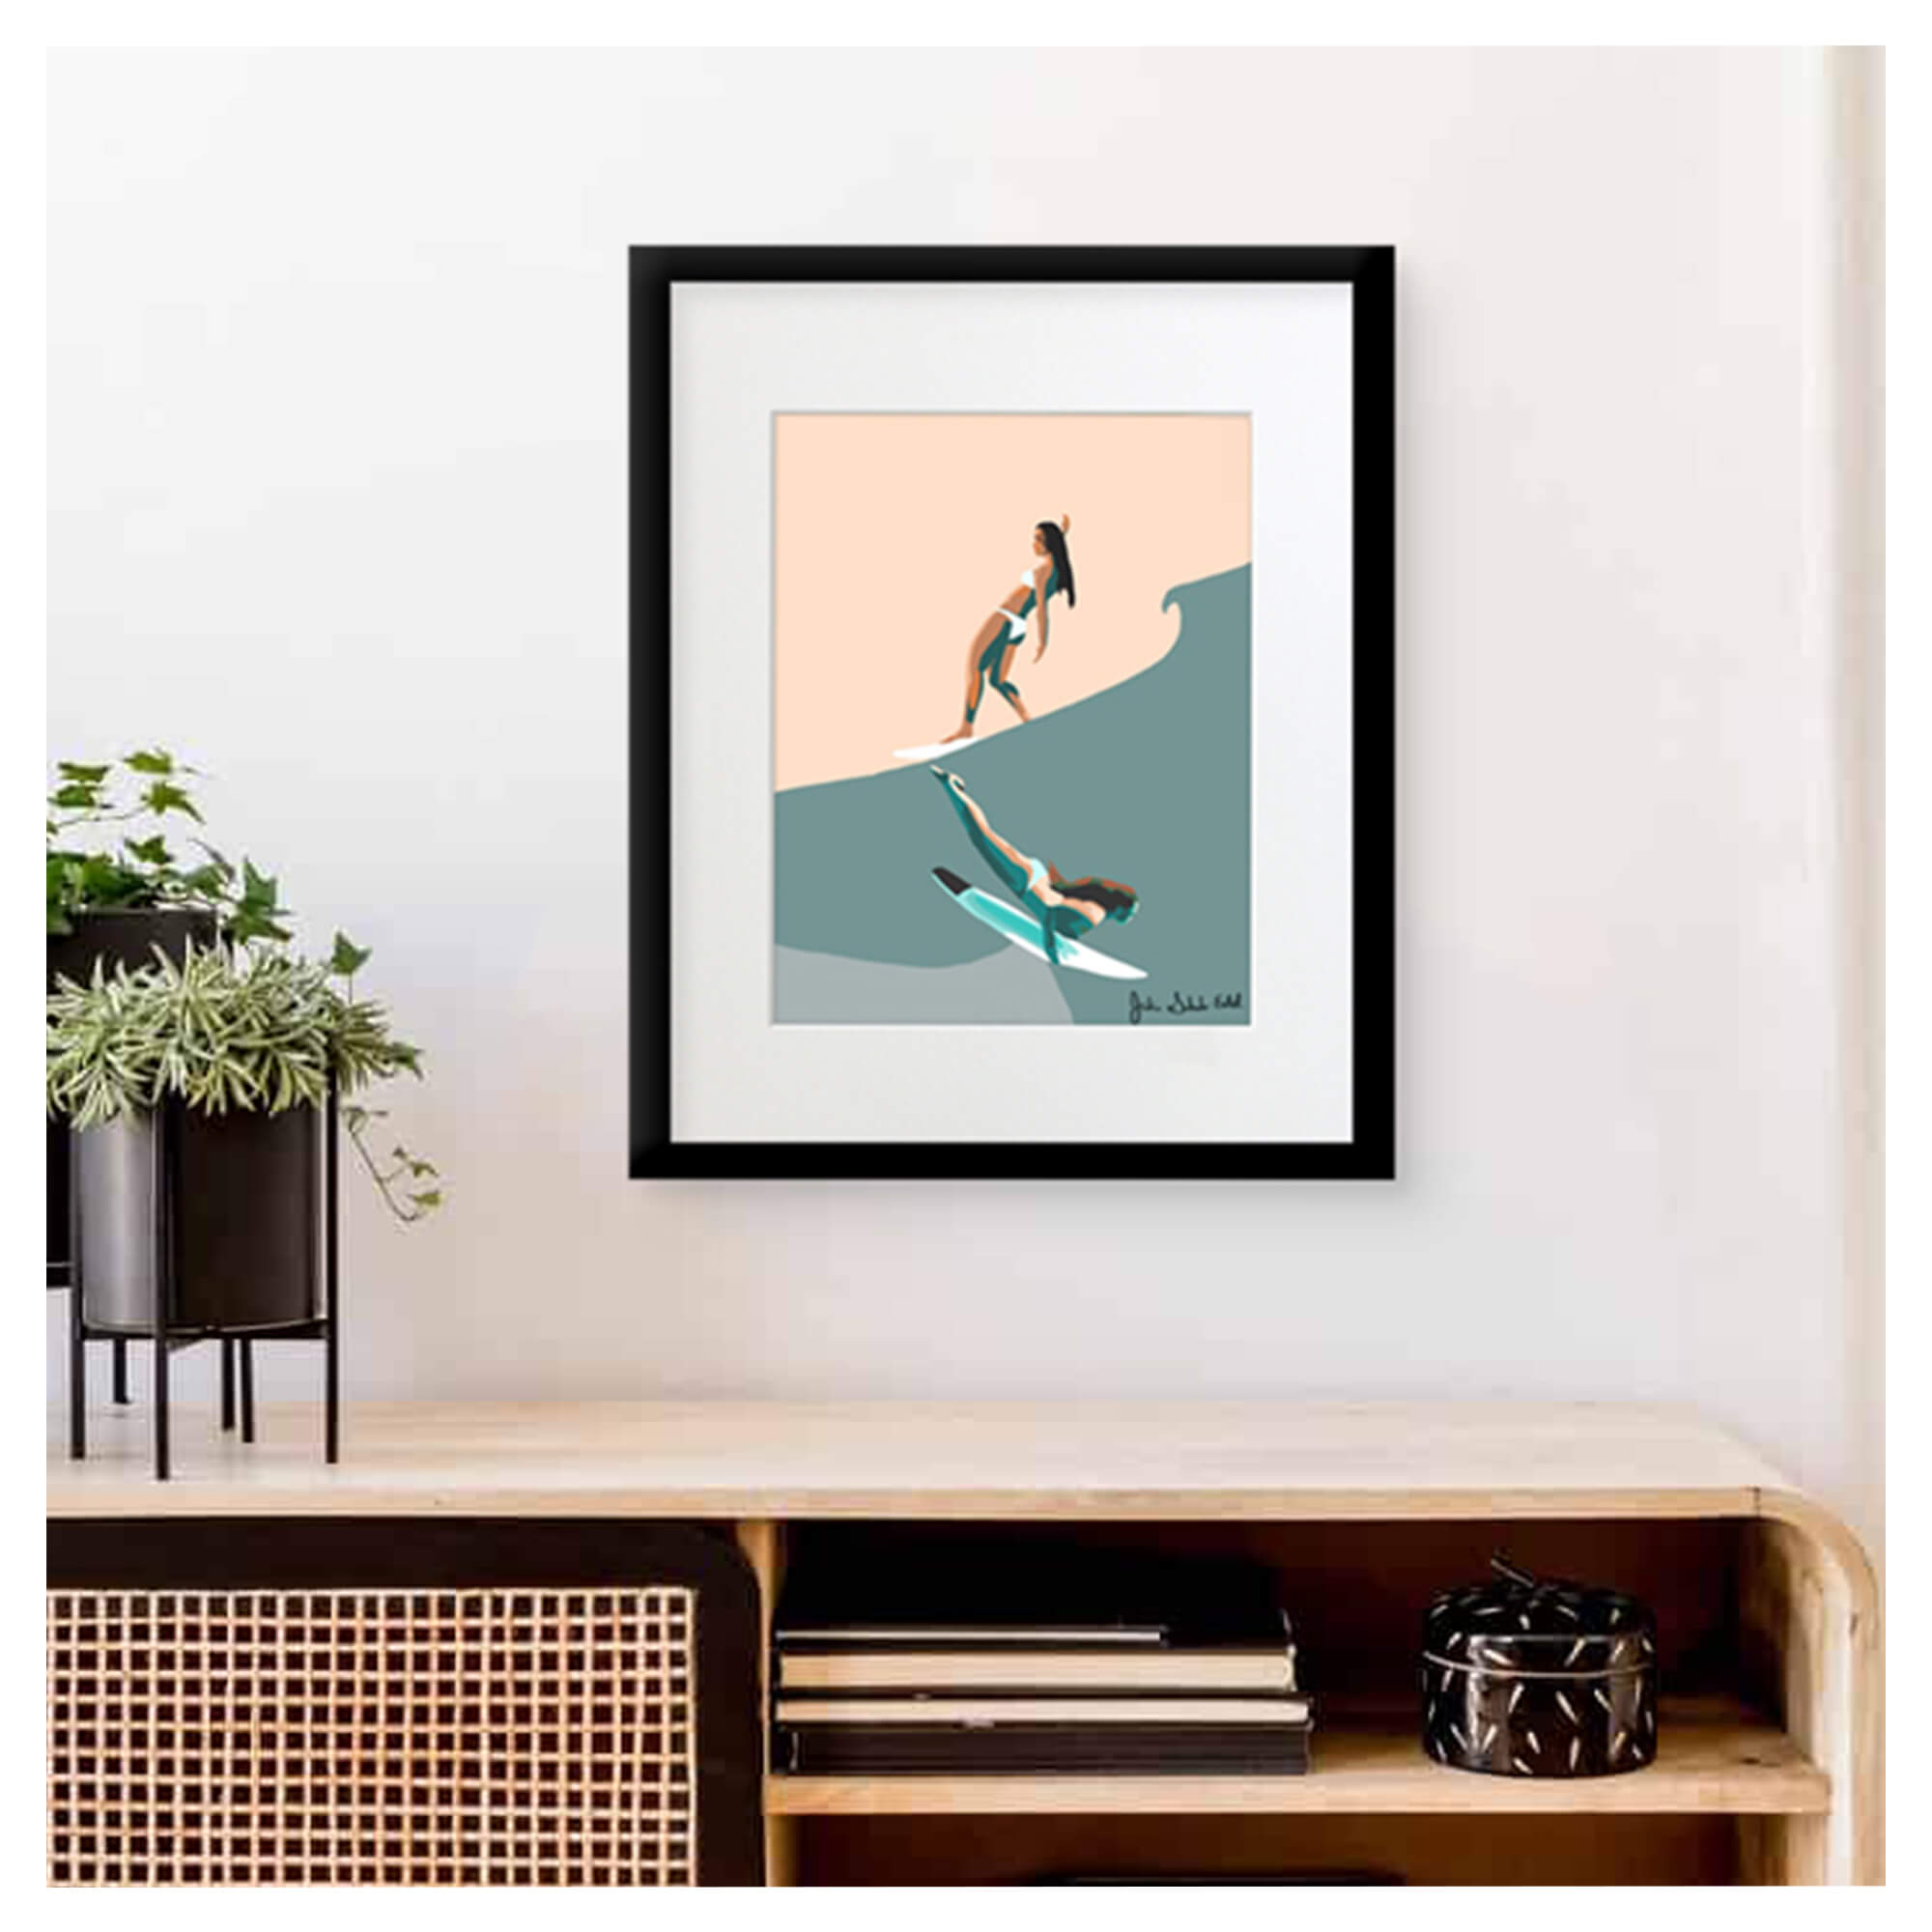 A framed matted art print featuring two female surfers, one riding the waves and the other just right beneath by Hawaii artist Jackie Eitel